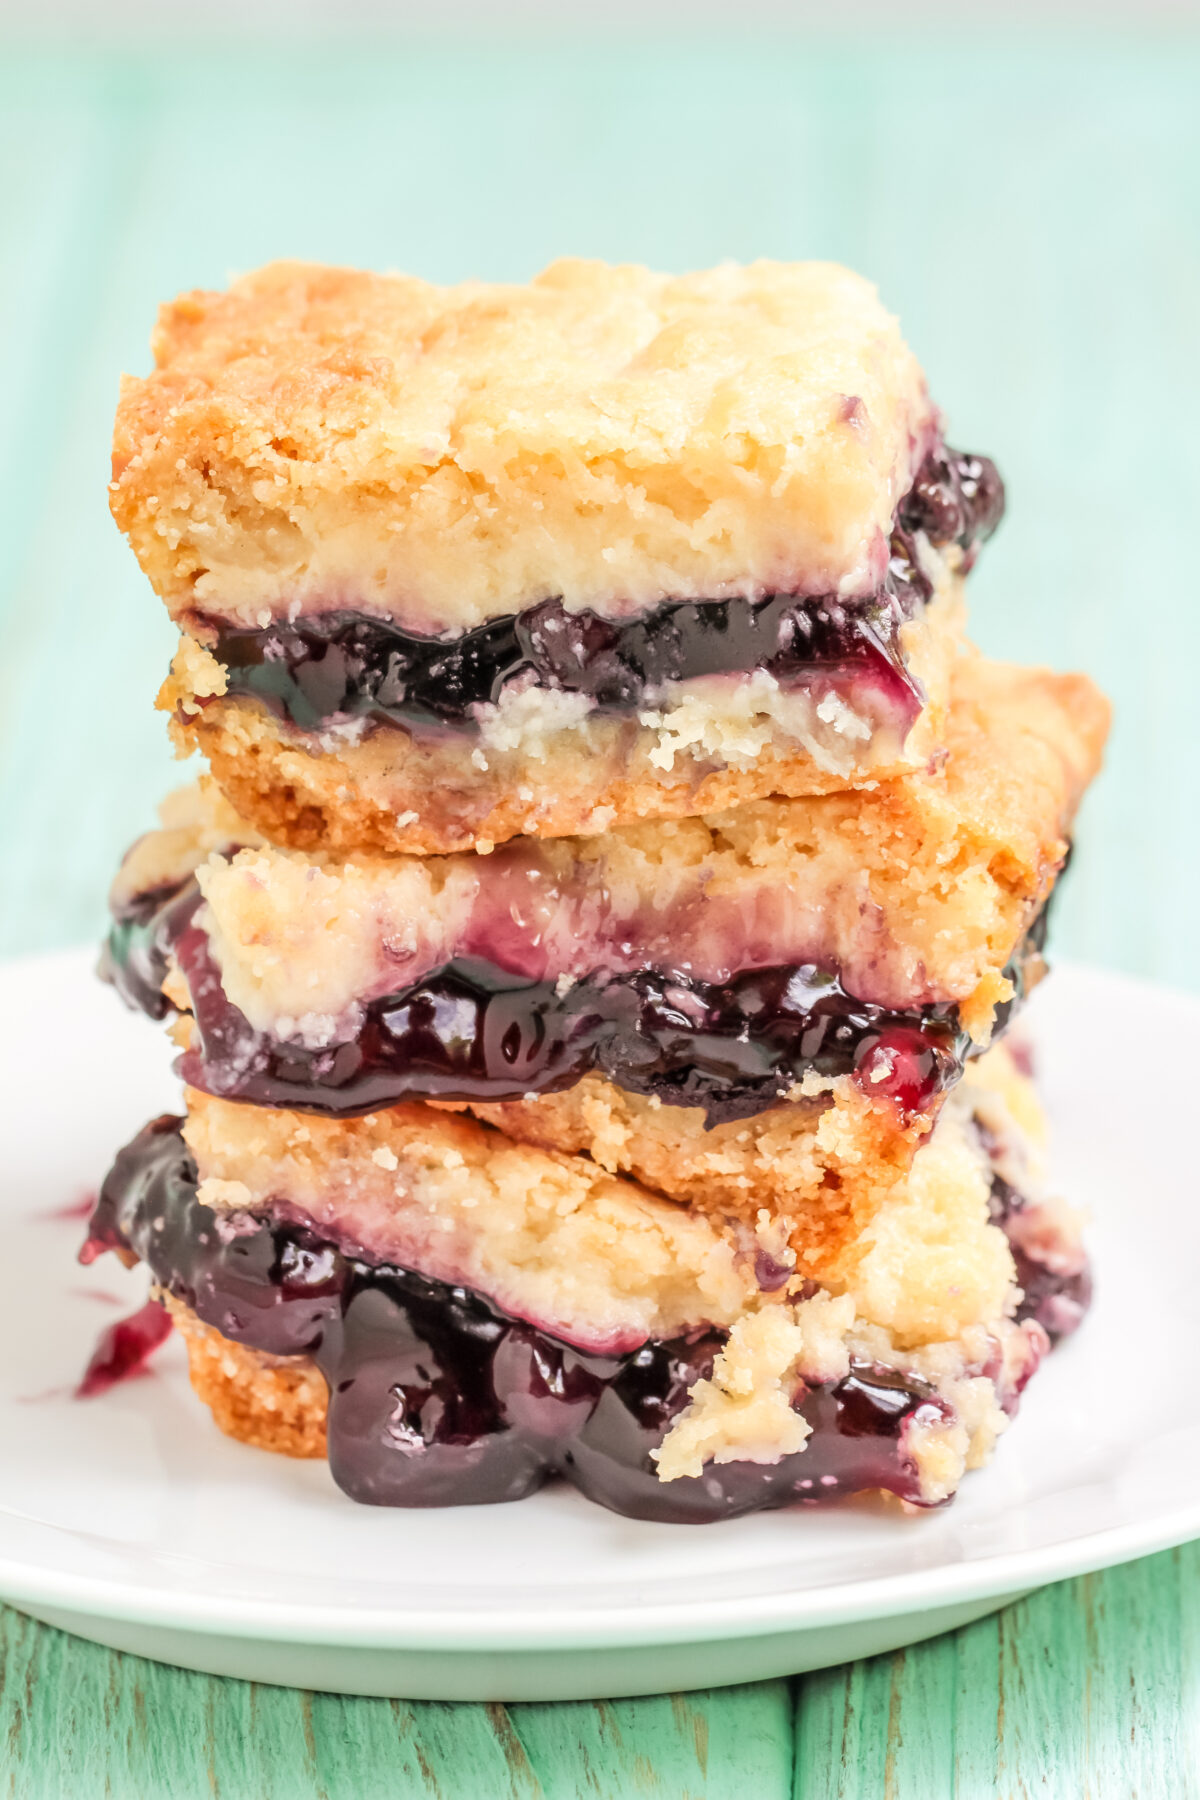 Made with cake mix and pie filling, this blueberry cream cheese bars recipe is a delicious and easy dessert that is perfect for any occasion!